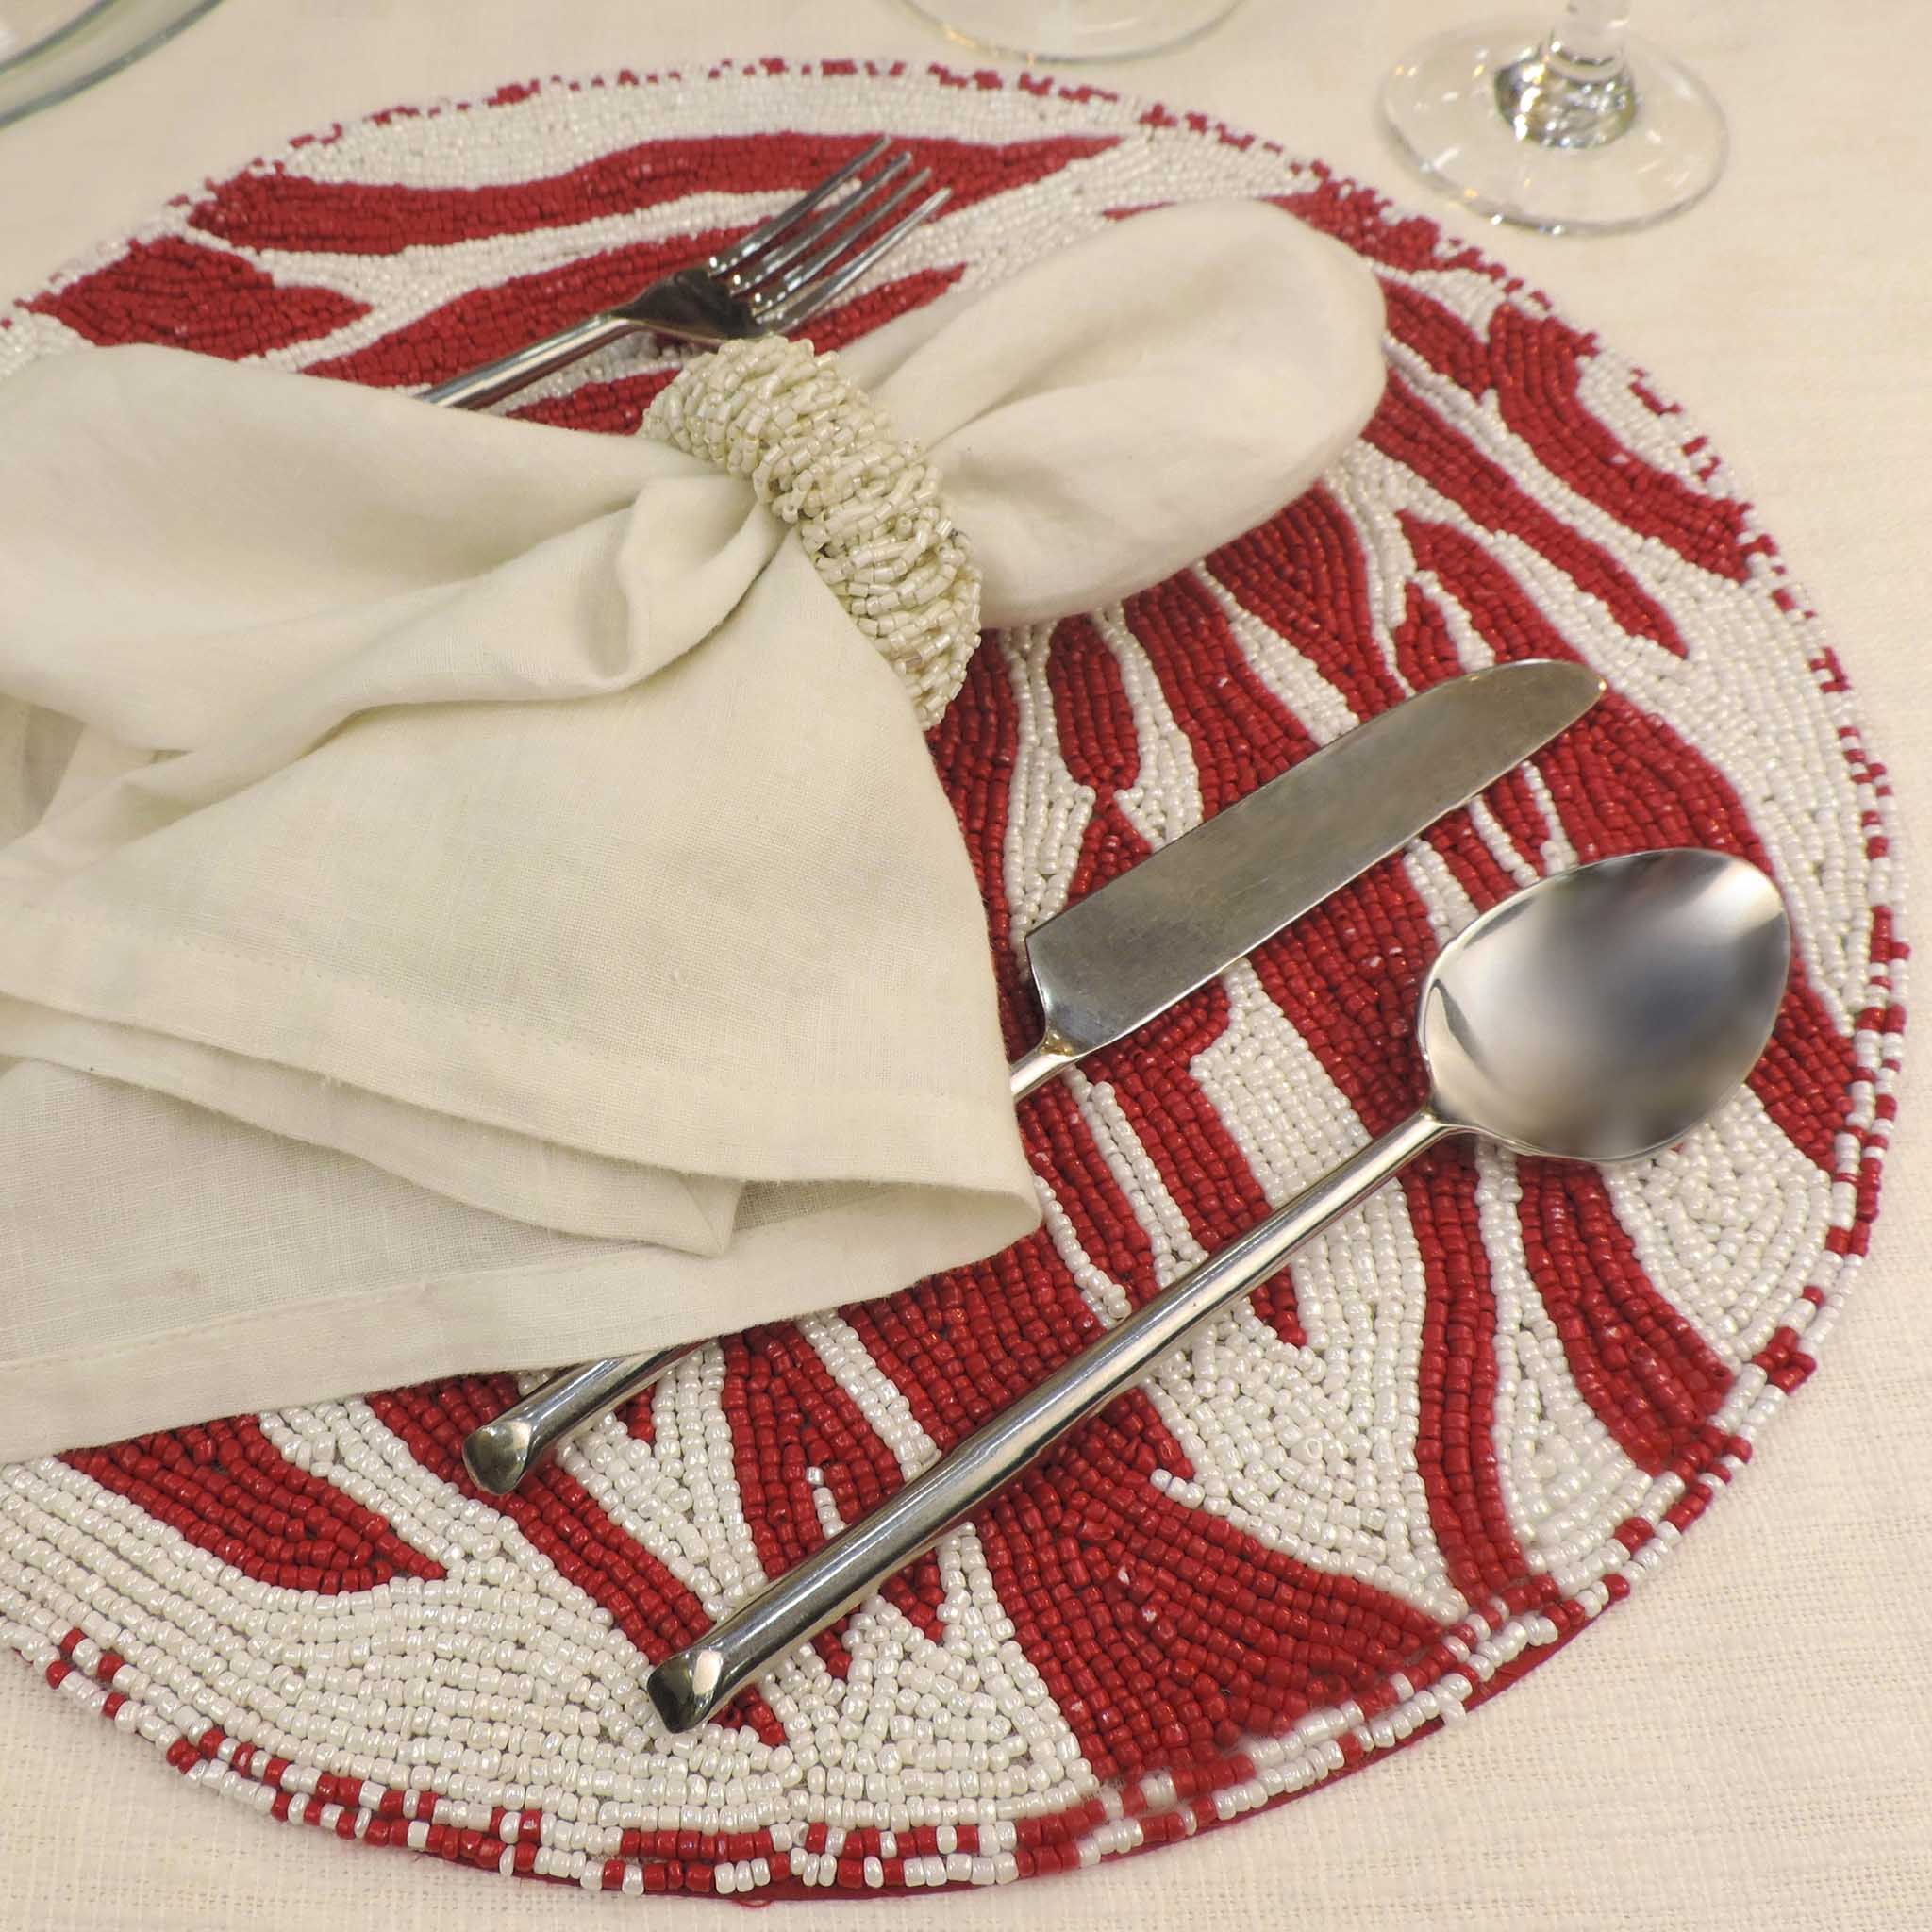 Modern Camo Glass Bead Embroidered Placemat in Red & White, Set of 2/4